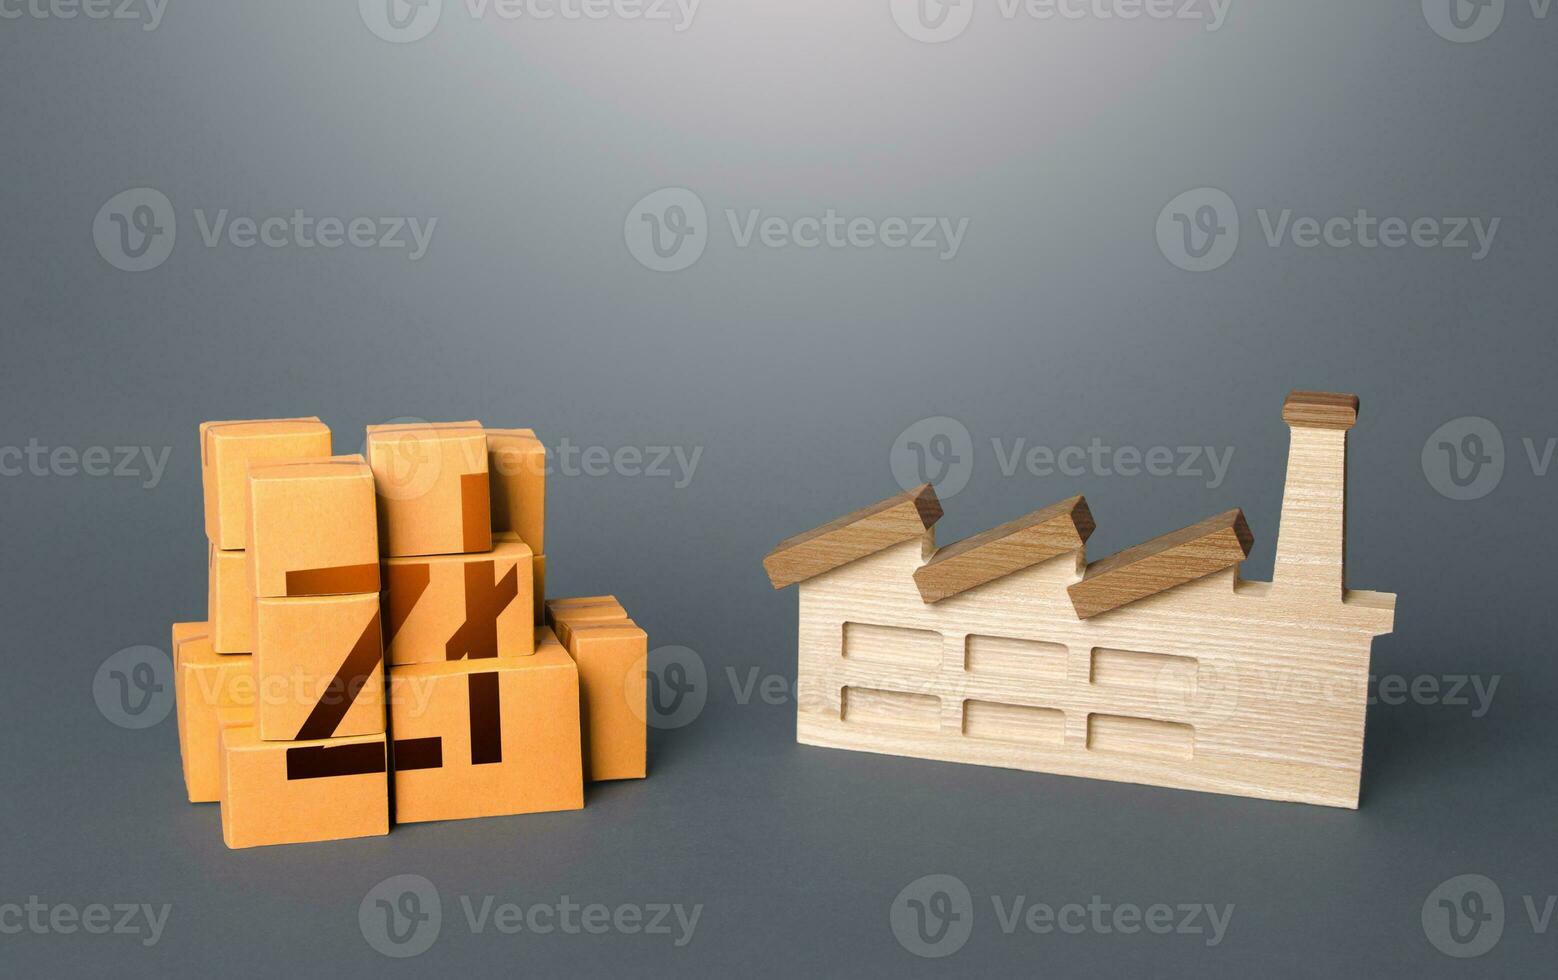 Industrial factory and polish zloty product boxes. Investment in expansion of production. National economy, domestic production of goods. Logistic transportation. Support manufactures. photo